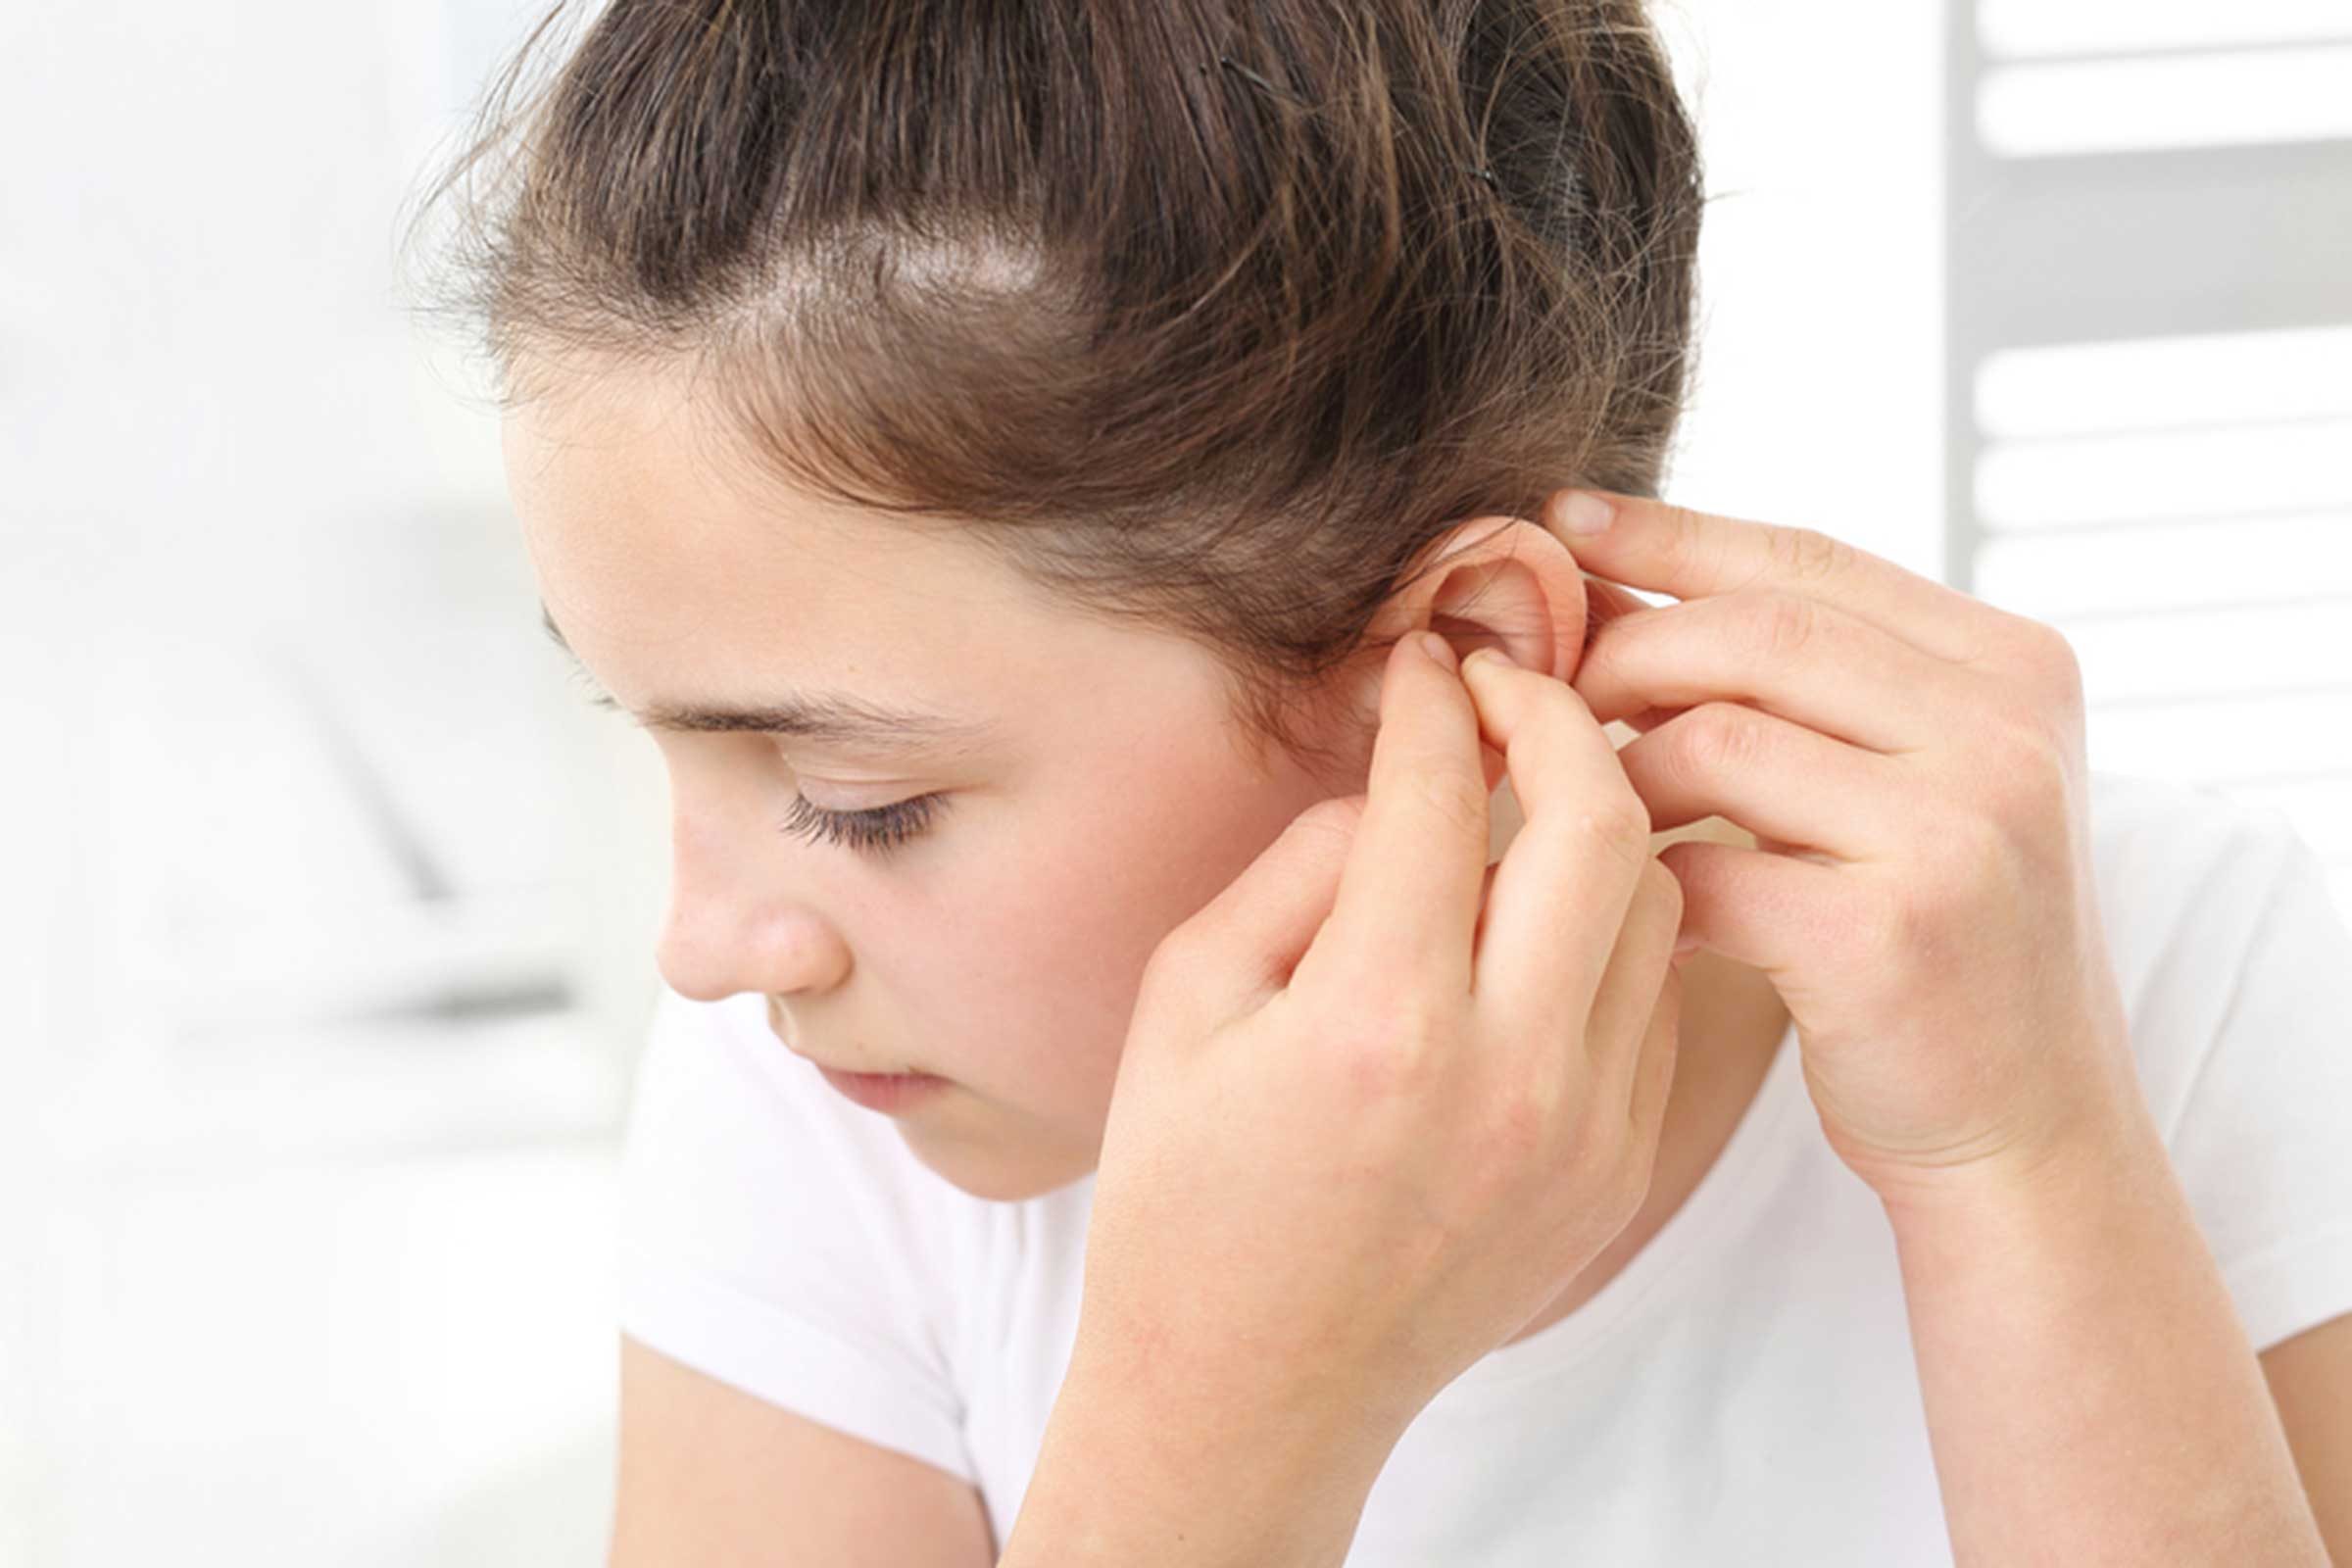 6 Earache and Ear Infection Home Remedies Every Parent Should Know